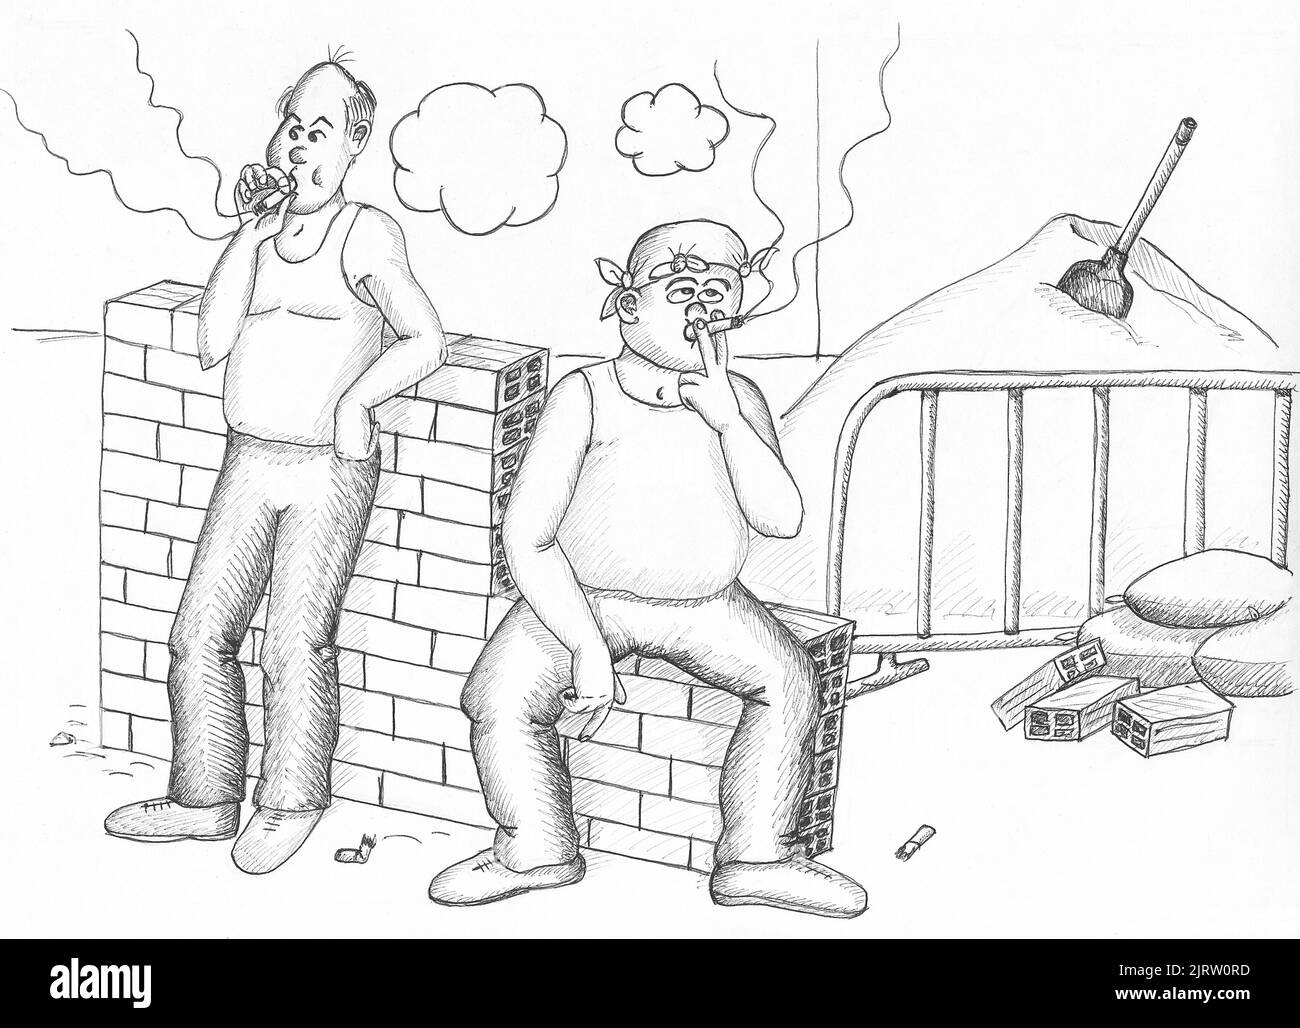 Two construction workers smoking. Illustration. Stock Photo